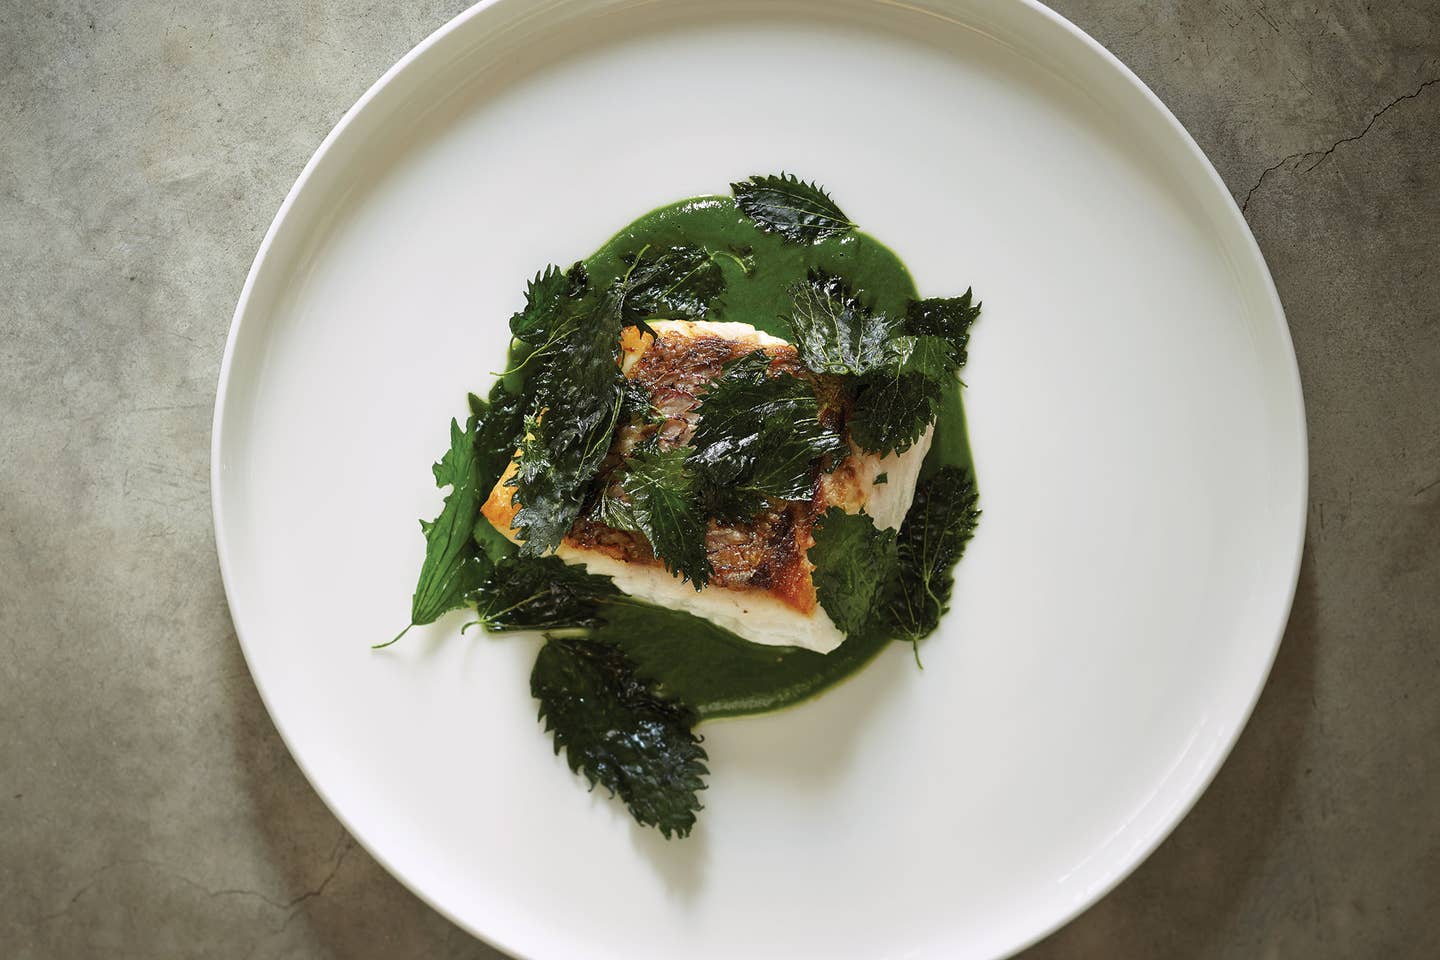 Seared Snapper with Nettle Sauce